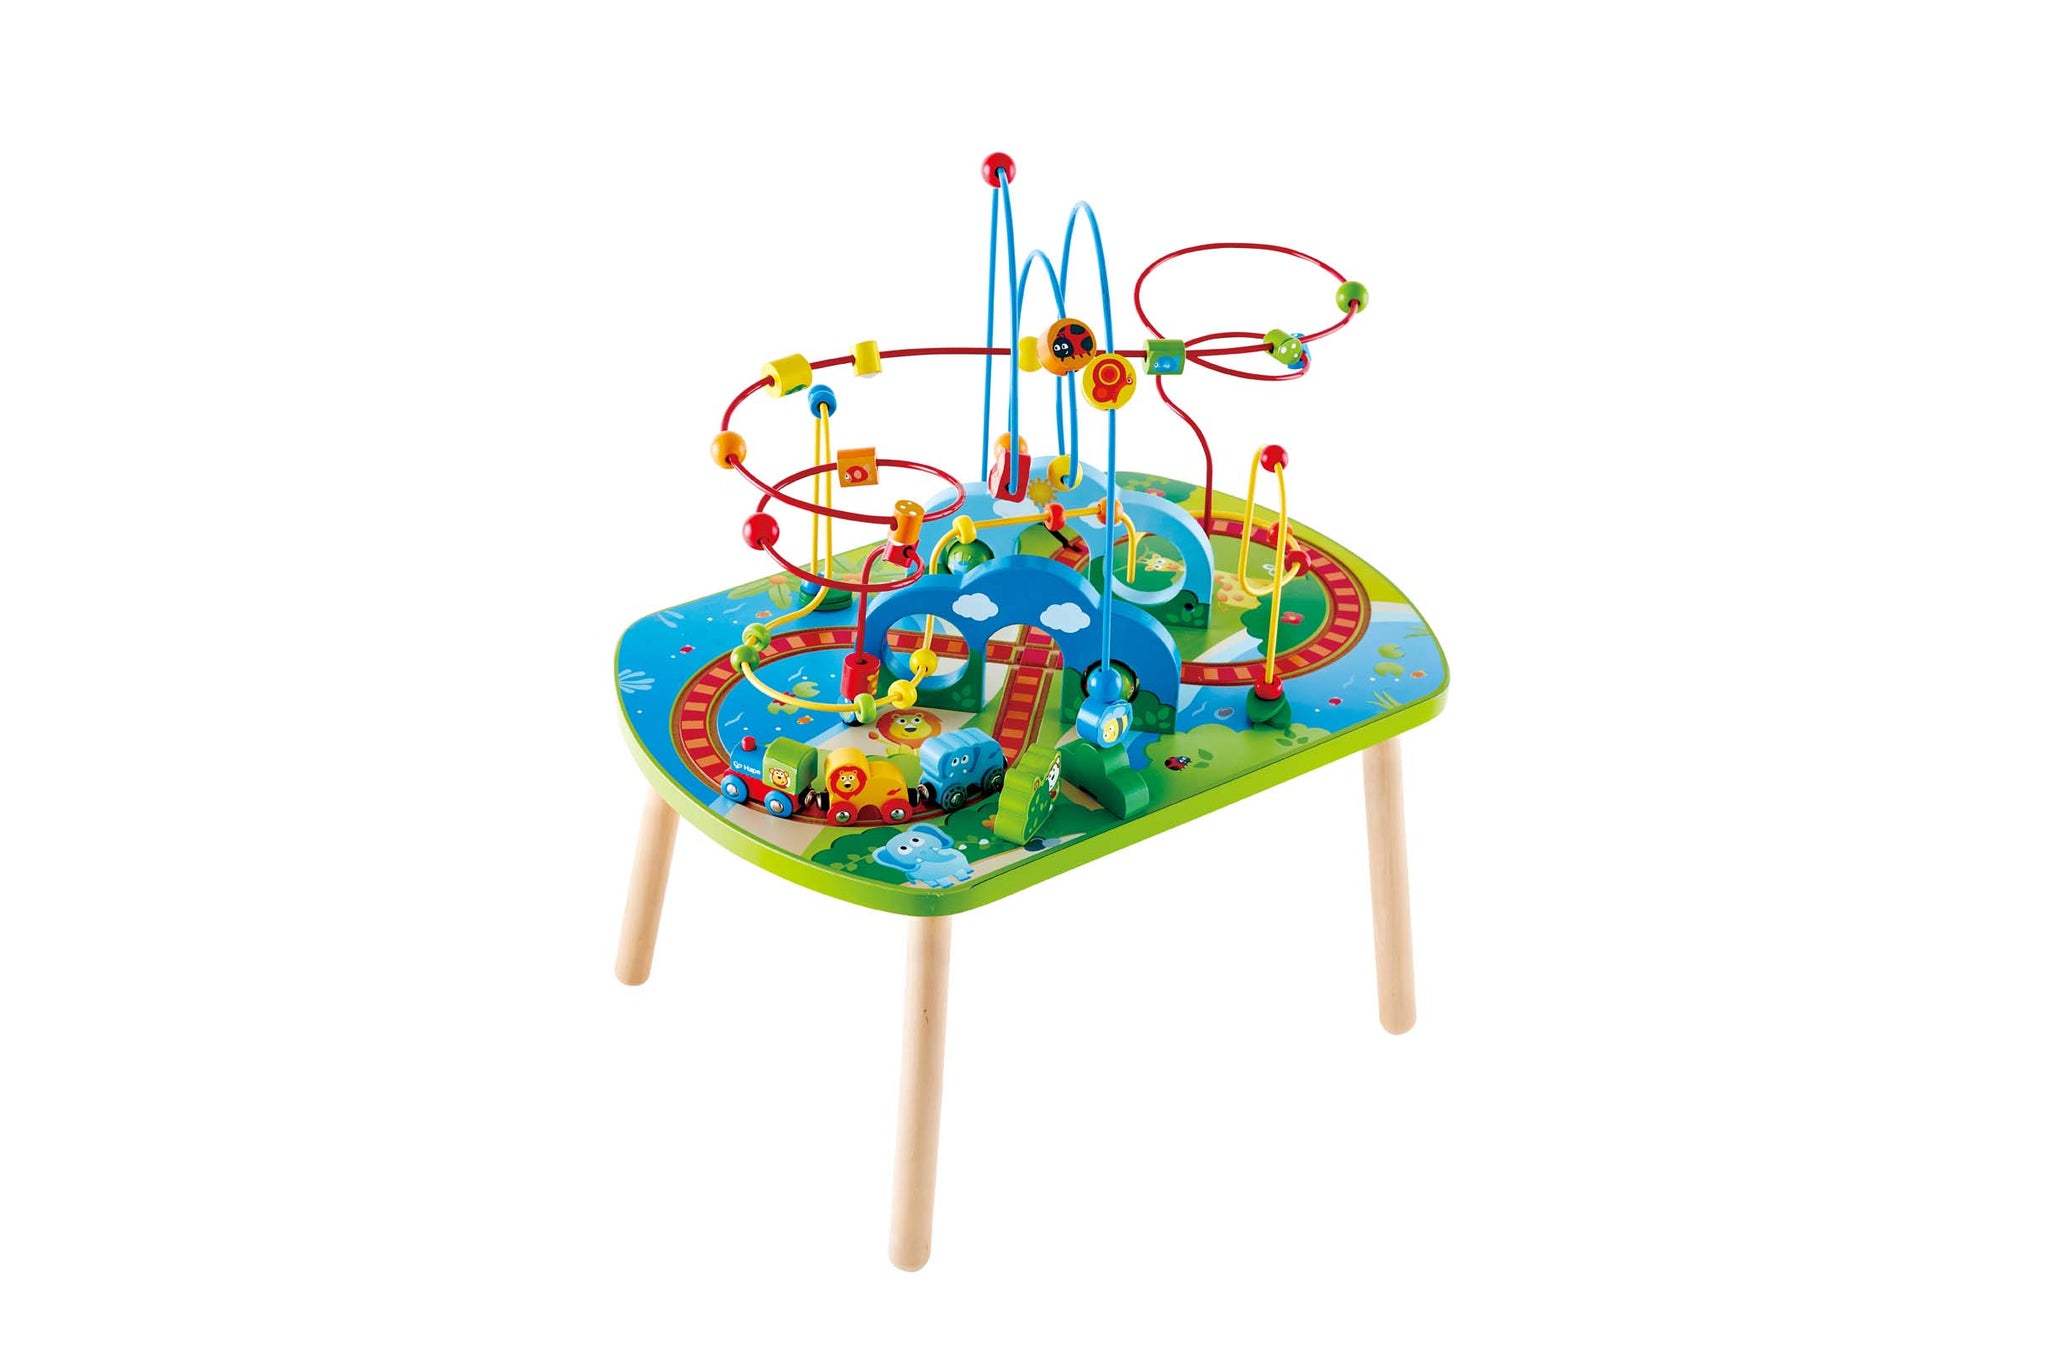 kids play table furniture for hape railway wooden childrens children with accessories jungle themed africa group activity center activity cube bead puzzle maze toddler toy set educational learning fun development 1 2 3 4 5 year olds boys boy girls girl